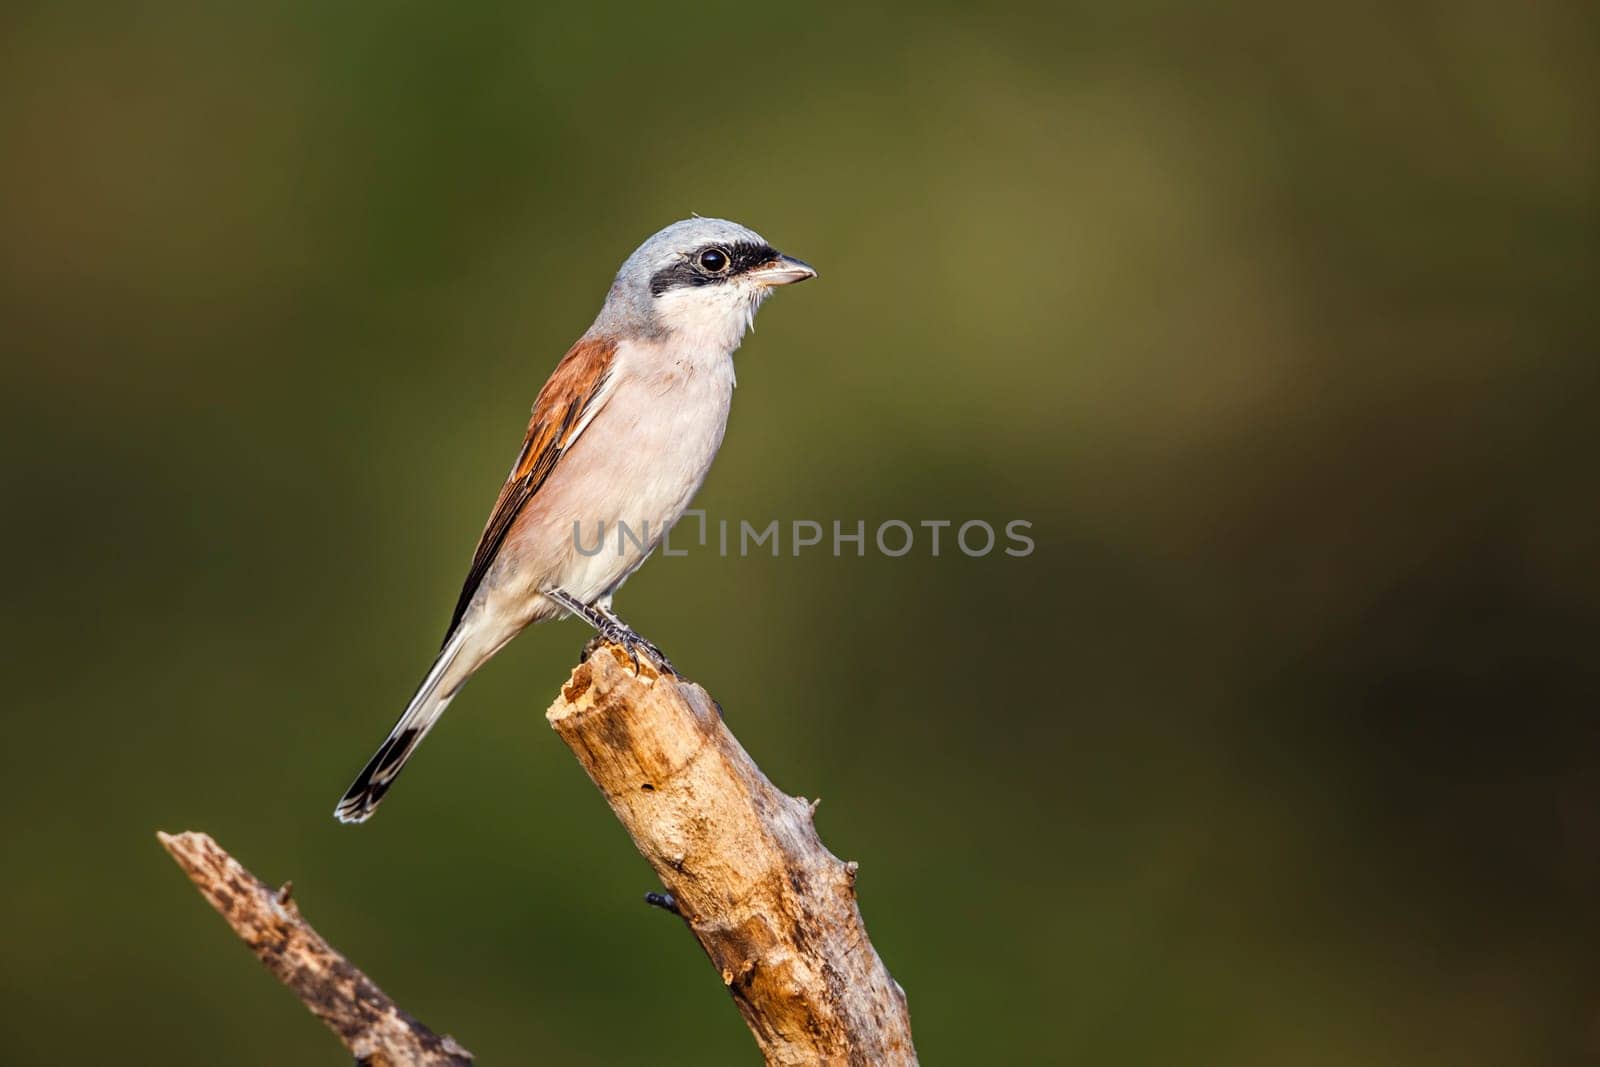 Red-backed Shrike standing on a branch isolated in natural background in Kruger National park, South Africa ; Specie Lanius collurio family of Laniidae